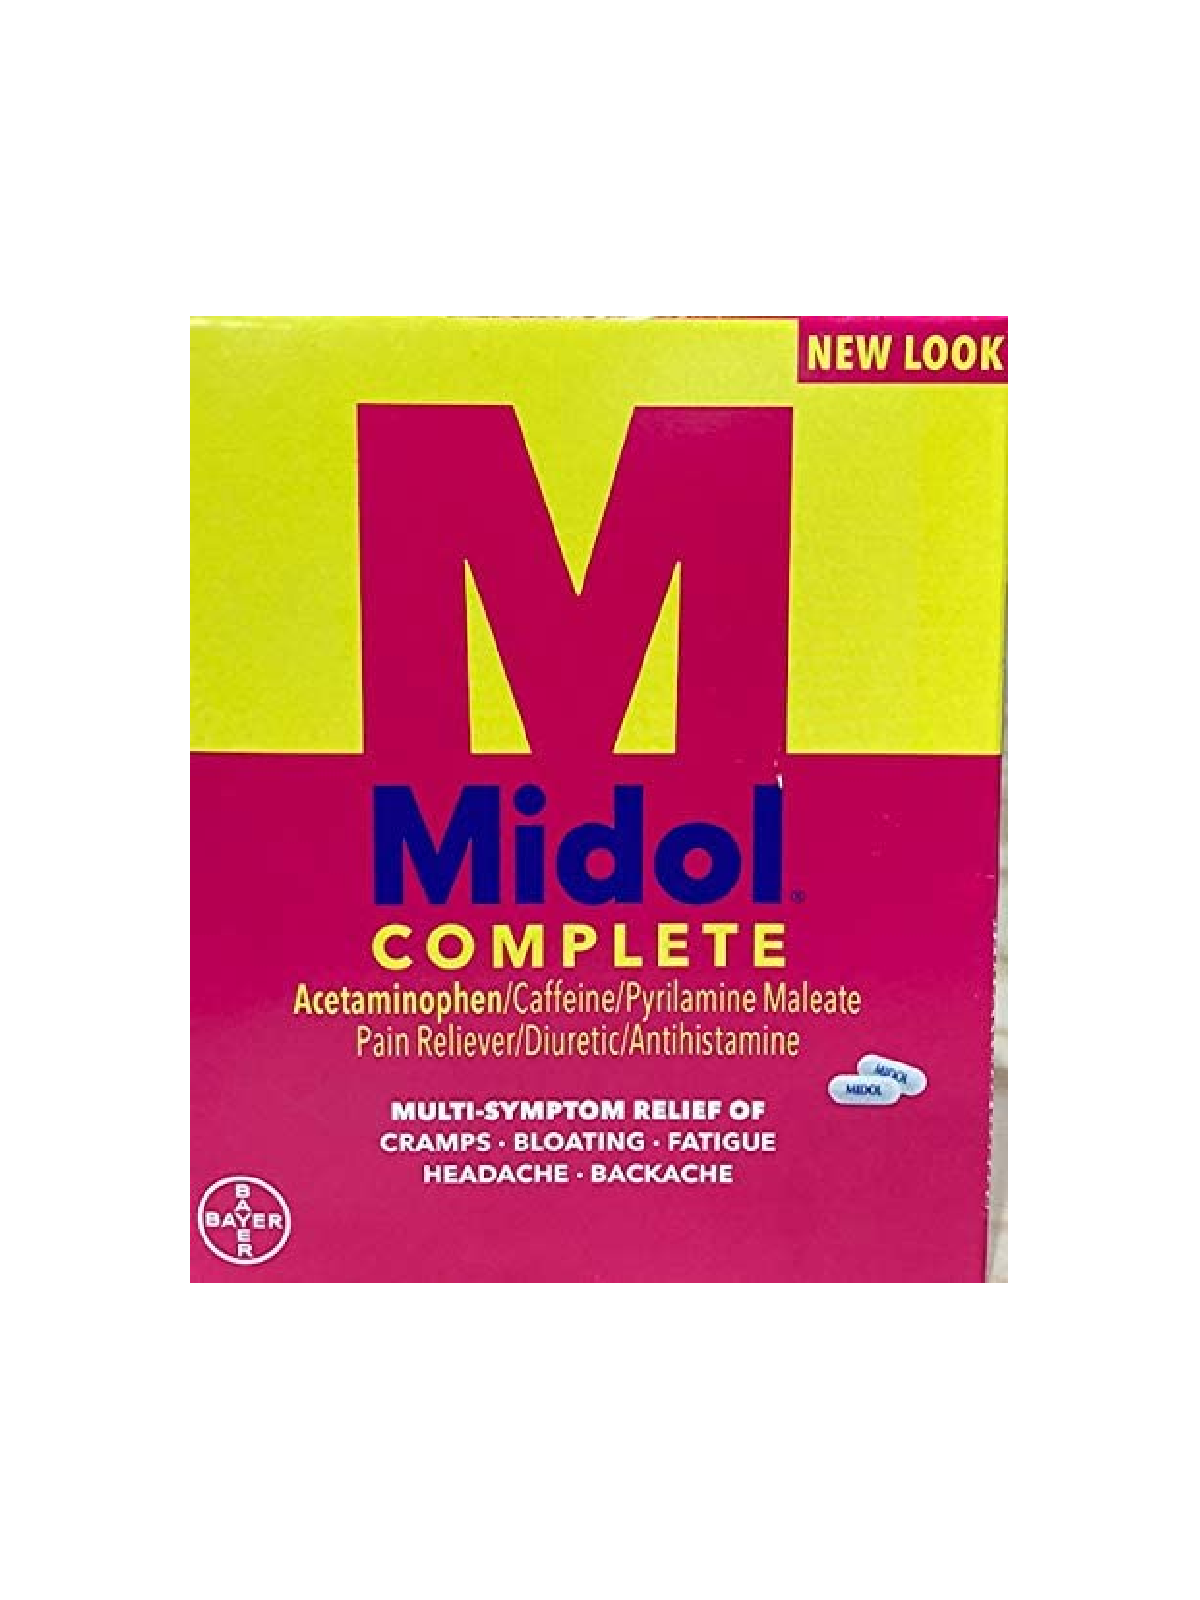 MIDOL COMPLETE 25 POUCHES OF 2 CAPLETS